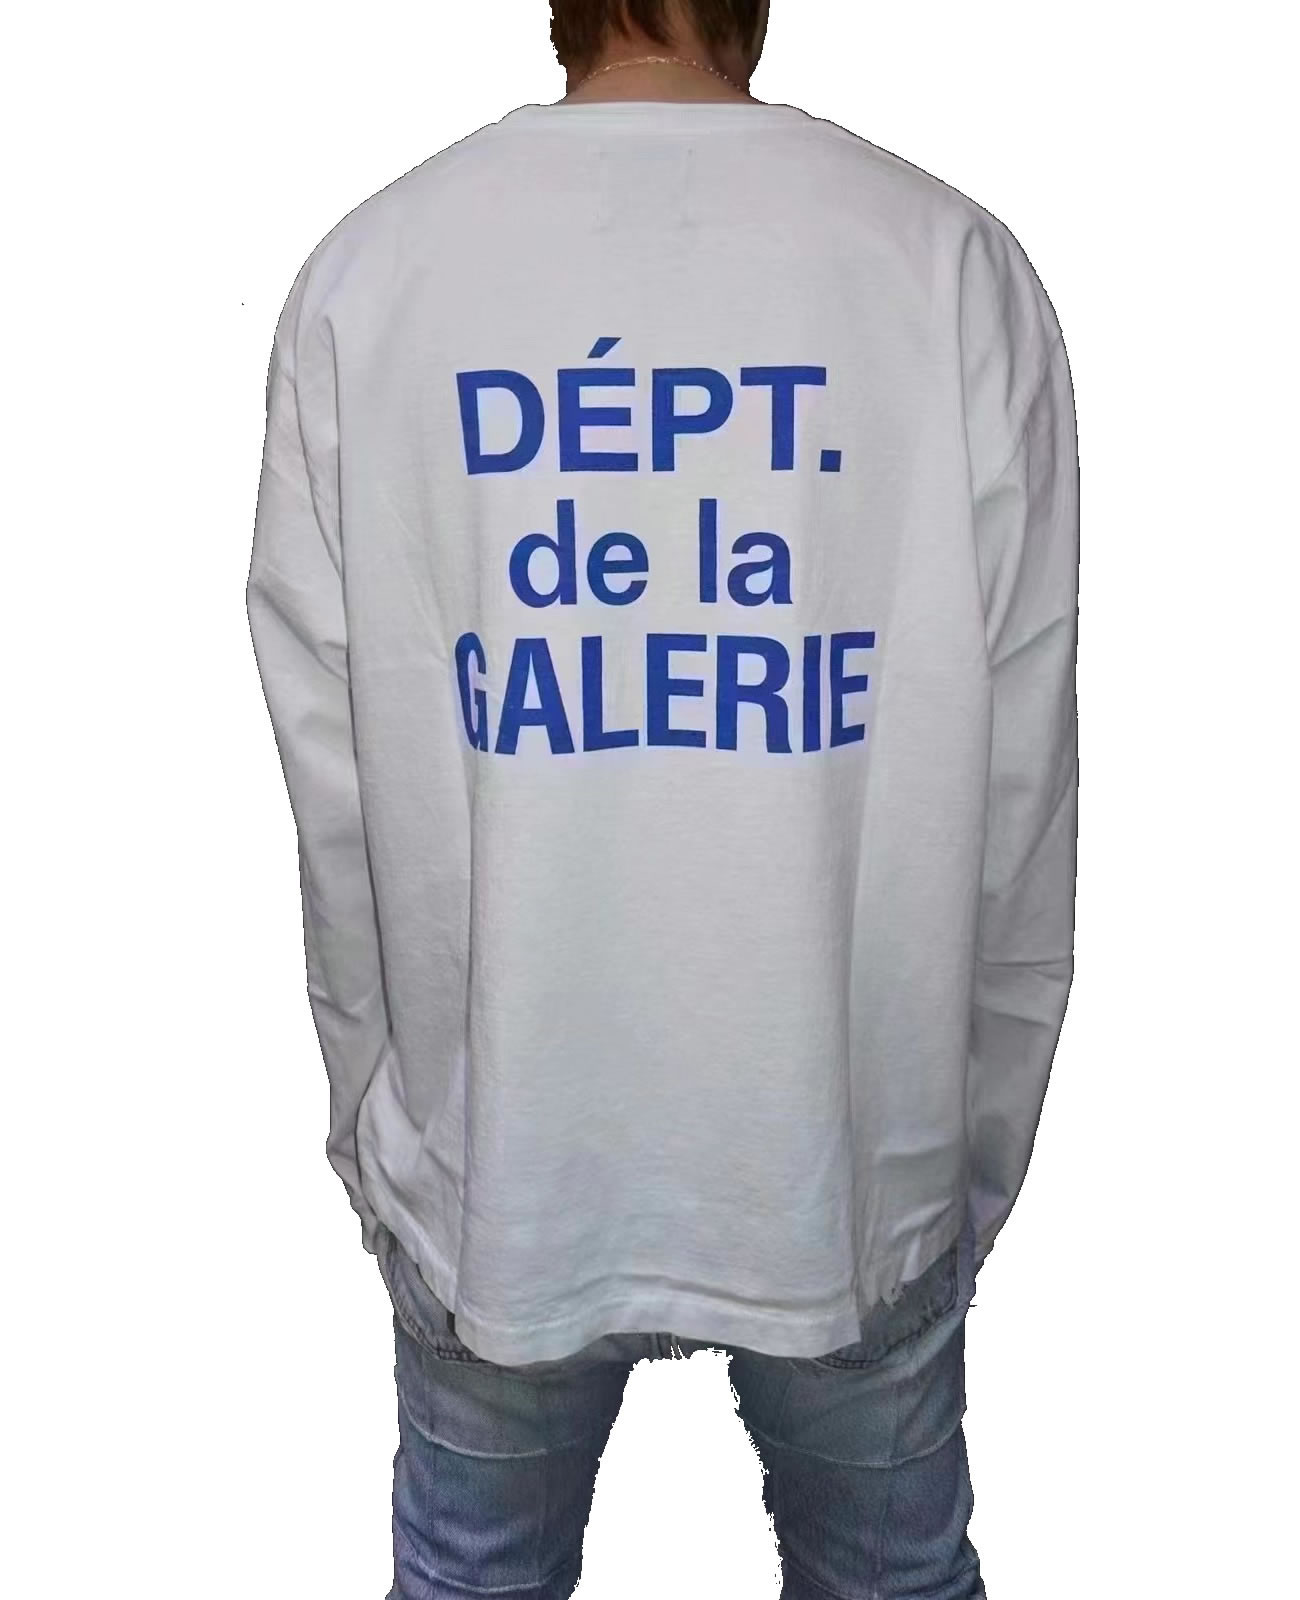 Gallery Dept. French Collector L S Tee White Blue Fw21 (2) - newkick.org